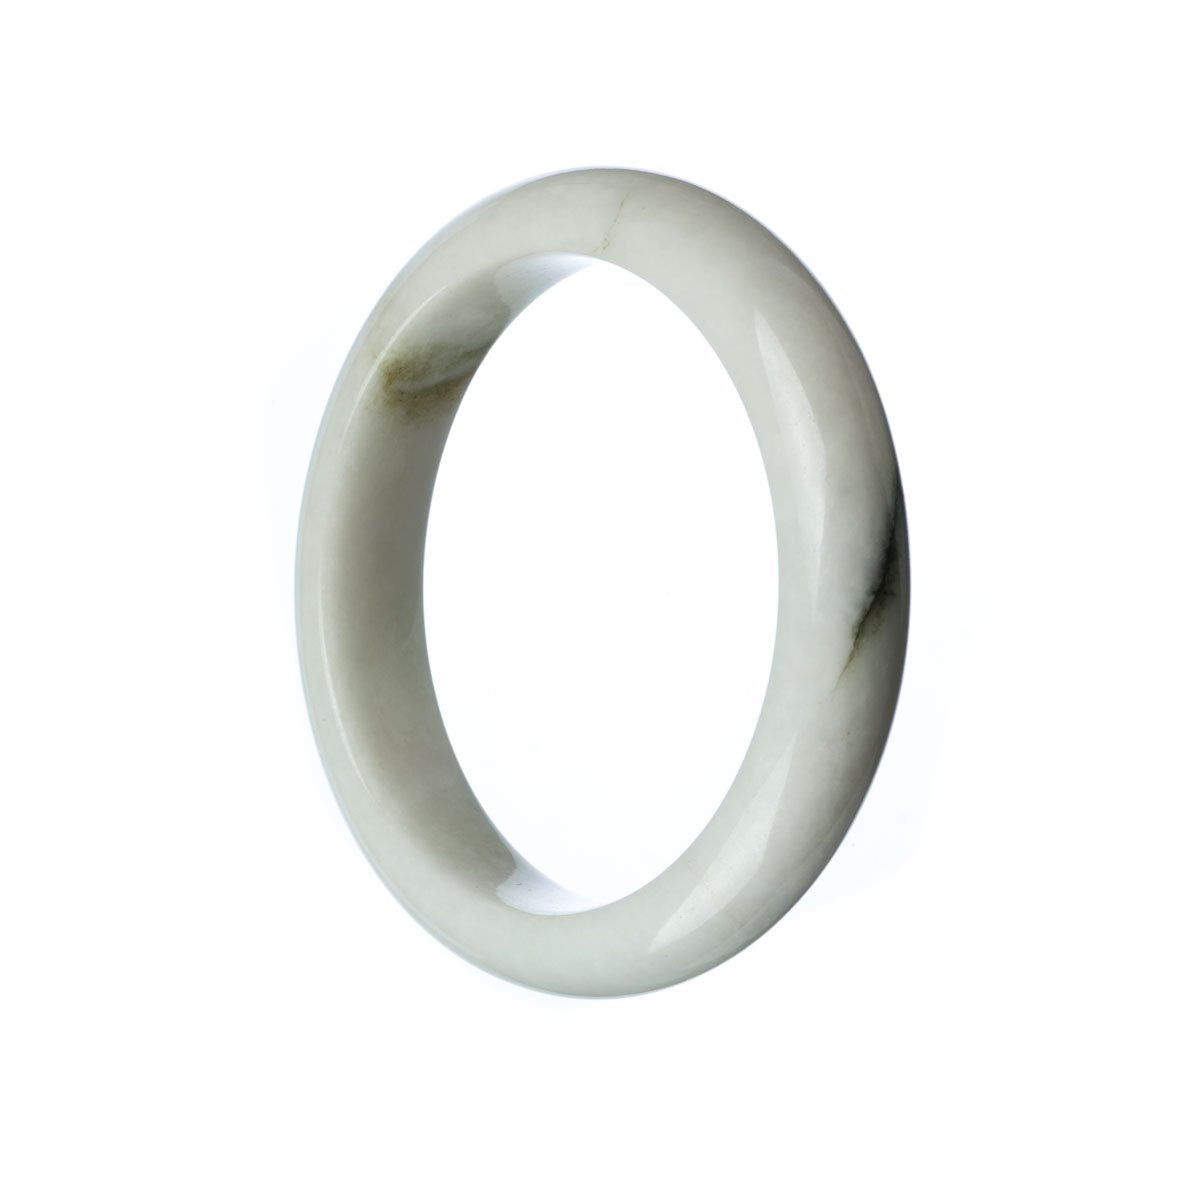 A close-up image of a delicate white jade bracelet with a half-moon shape. The bracelet is made of high-quality Grade A white jade and measures 58mm in size. It is a beautiful piece of jewelry from MAYS GEMS.